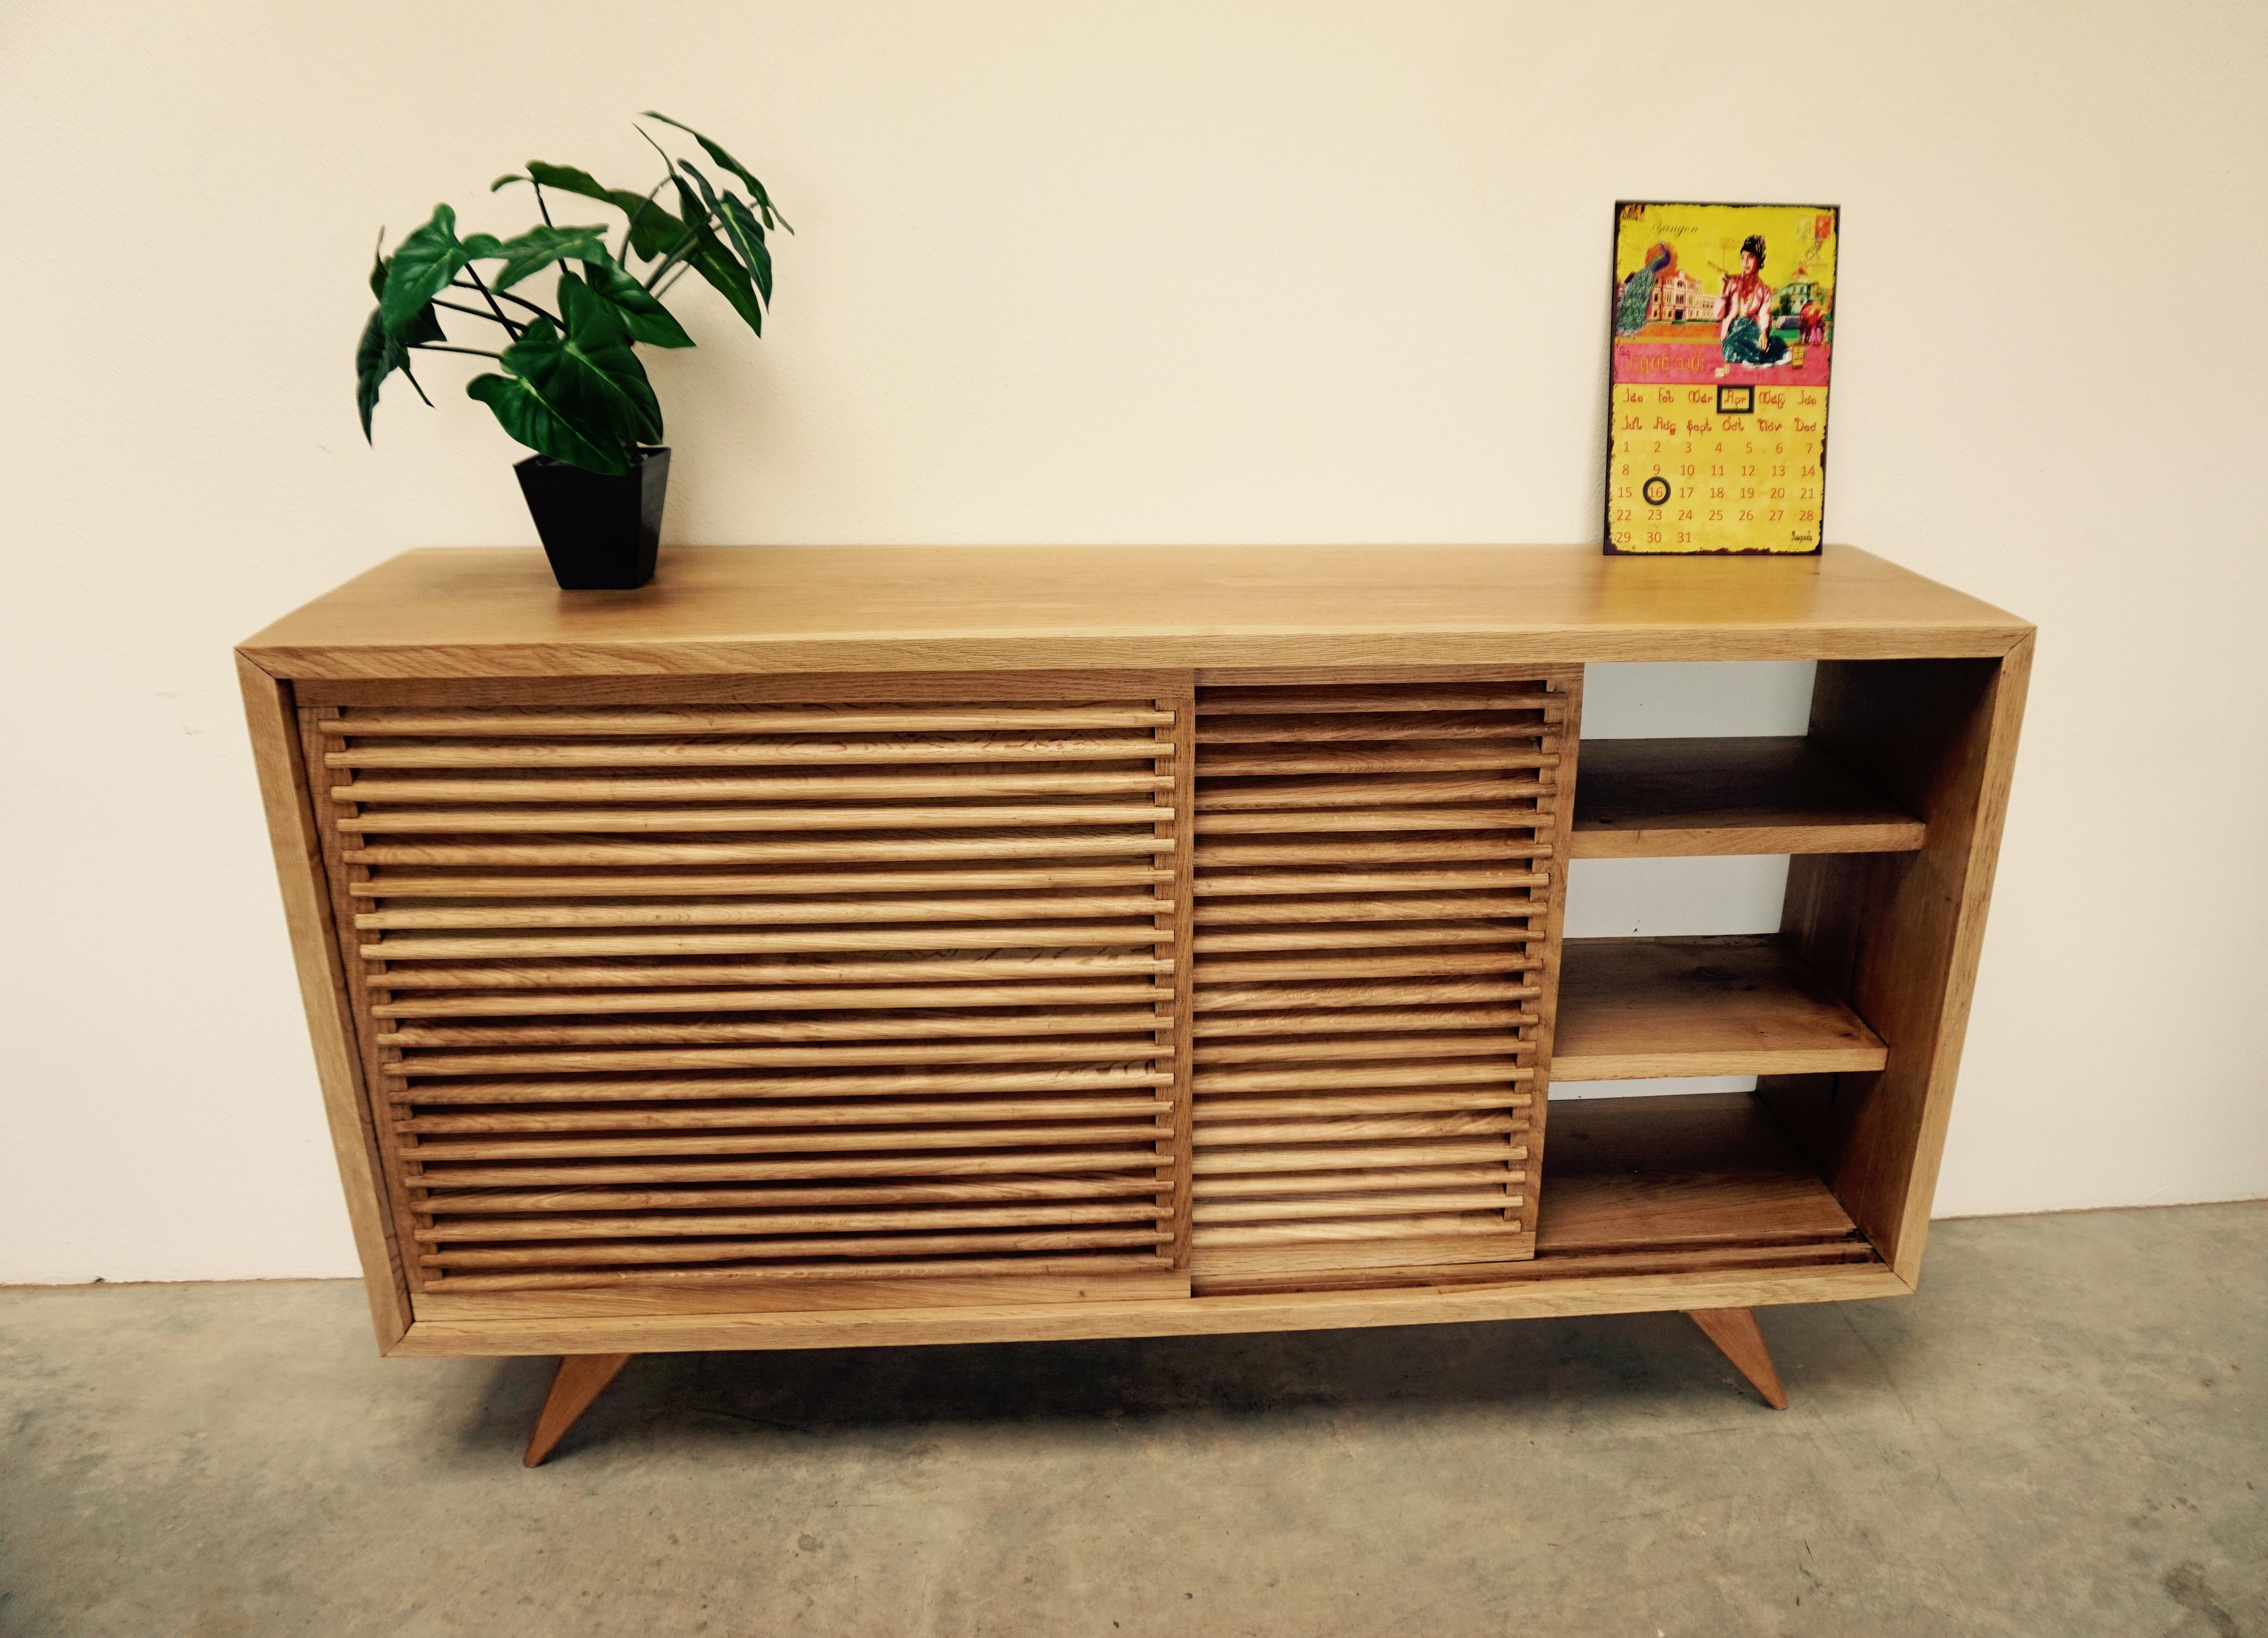 A solid Oak sideboard with two central sliding doors that are comprised of multiple rounded slats, uniformly spaced at a downward facing angle. They have an easy sliding system in order to enable smooth functionality. Resembling European shutters of